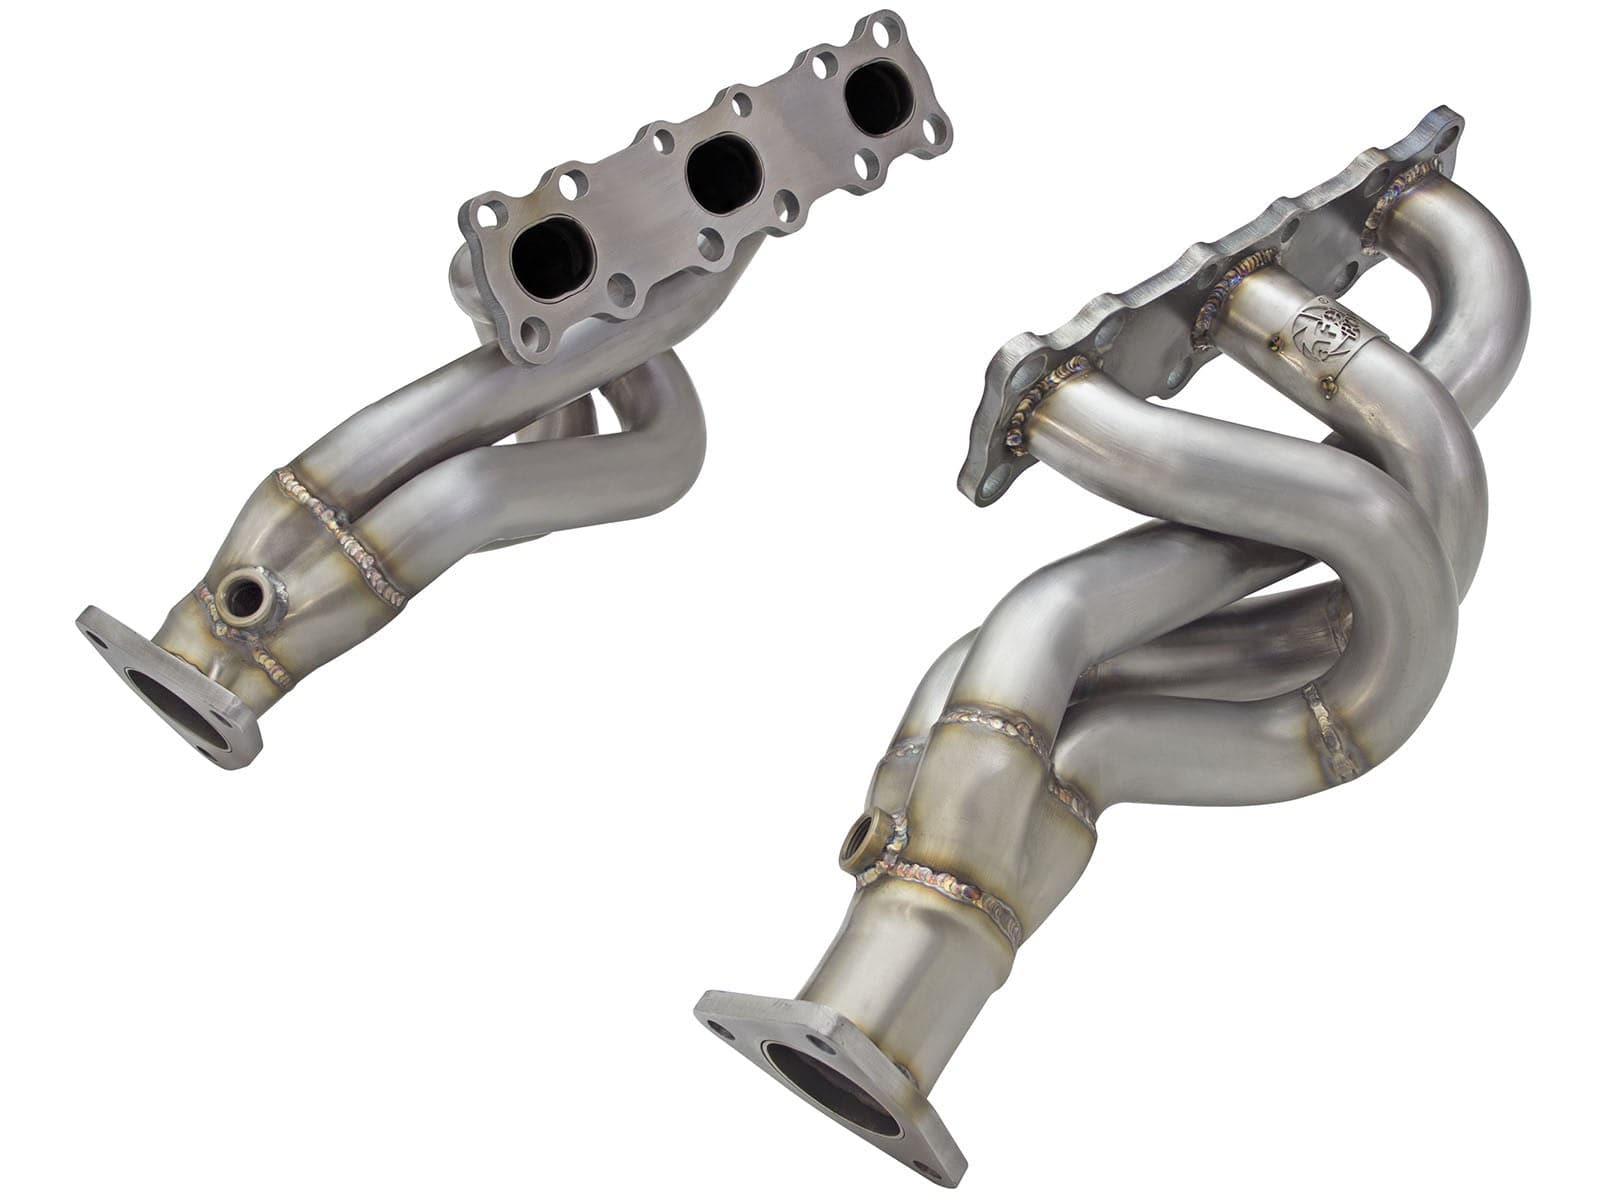 aFe 3-1 Twisted Steel Headers for 350Z, 370Z, G35, G37, & Q60